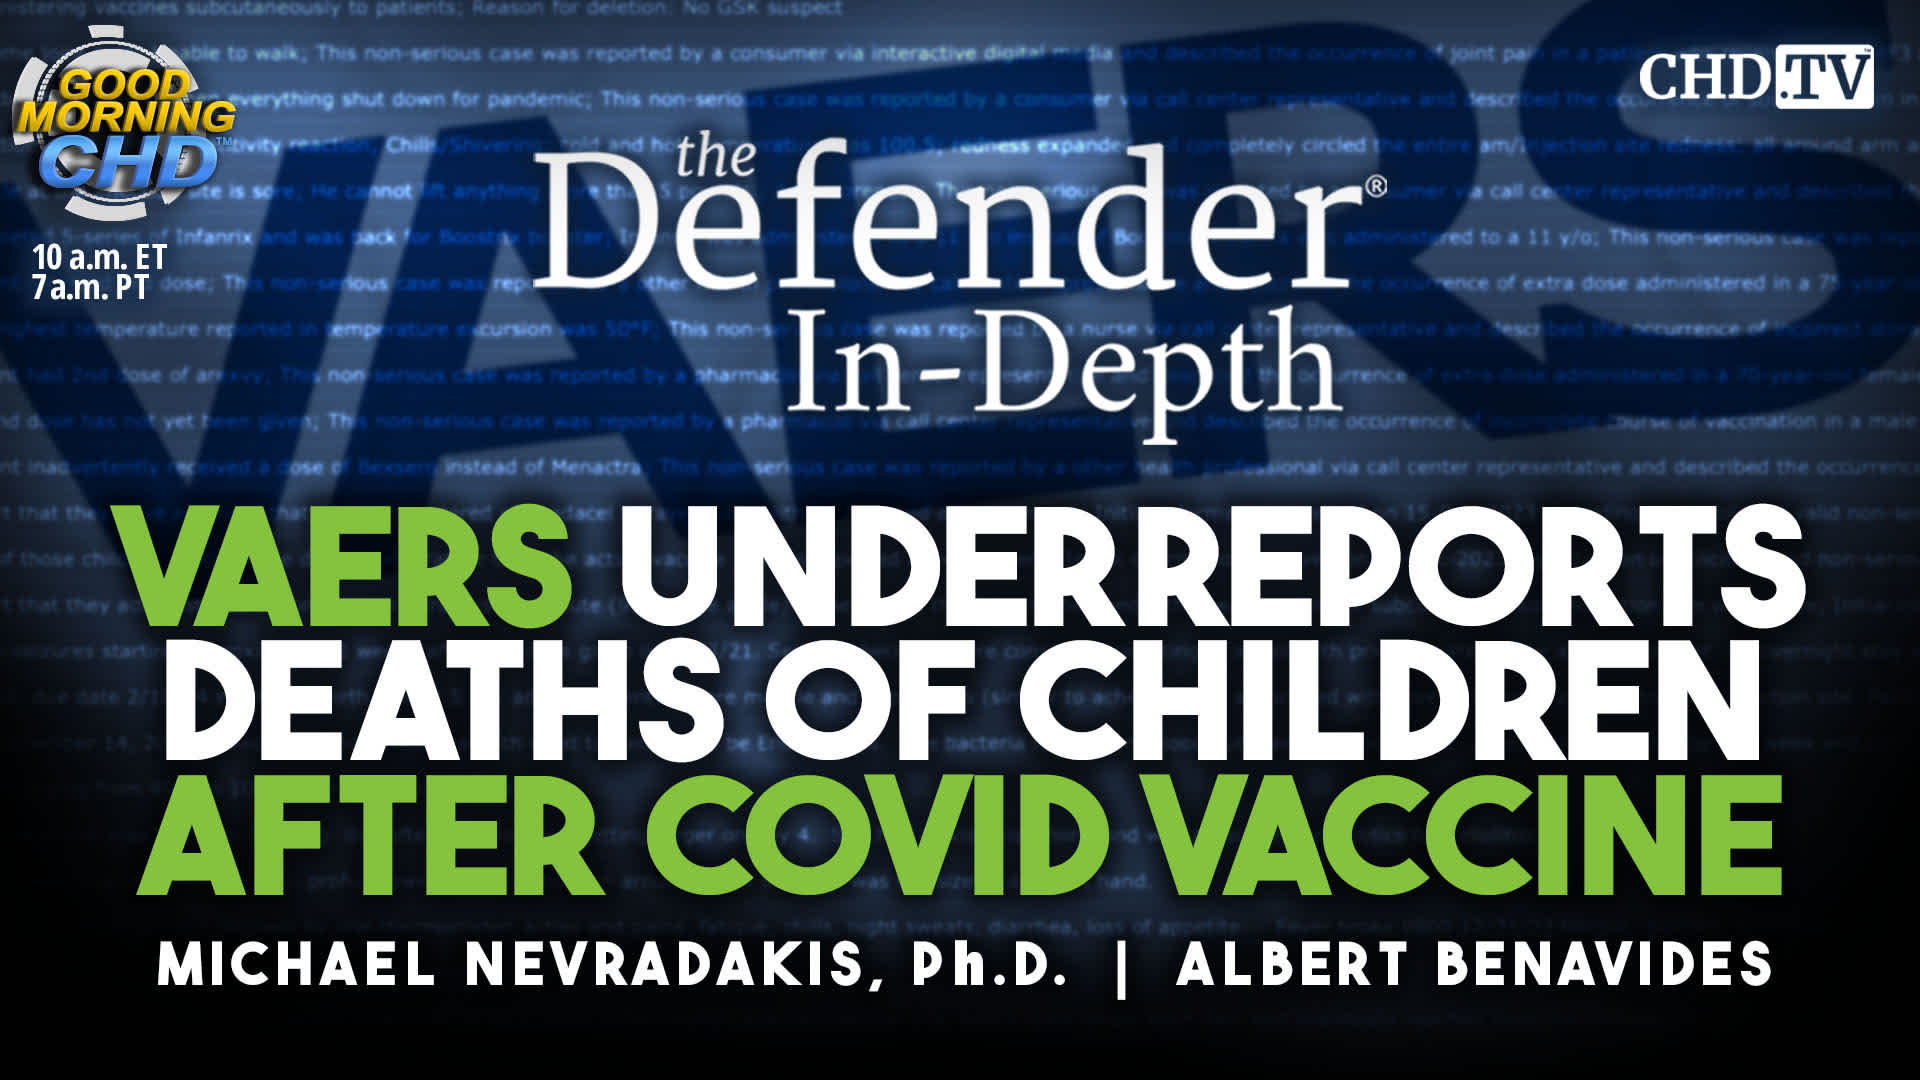 VAERS Underreports Deaths of Children After COVID Vaccine